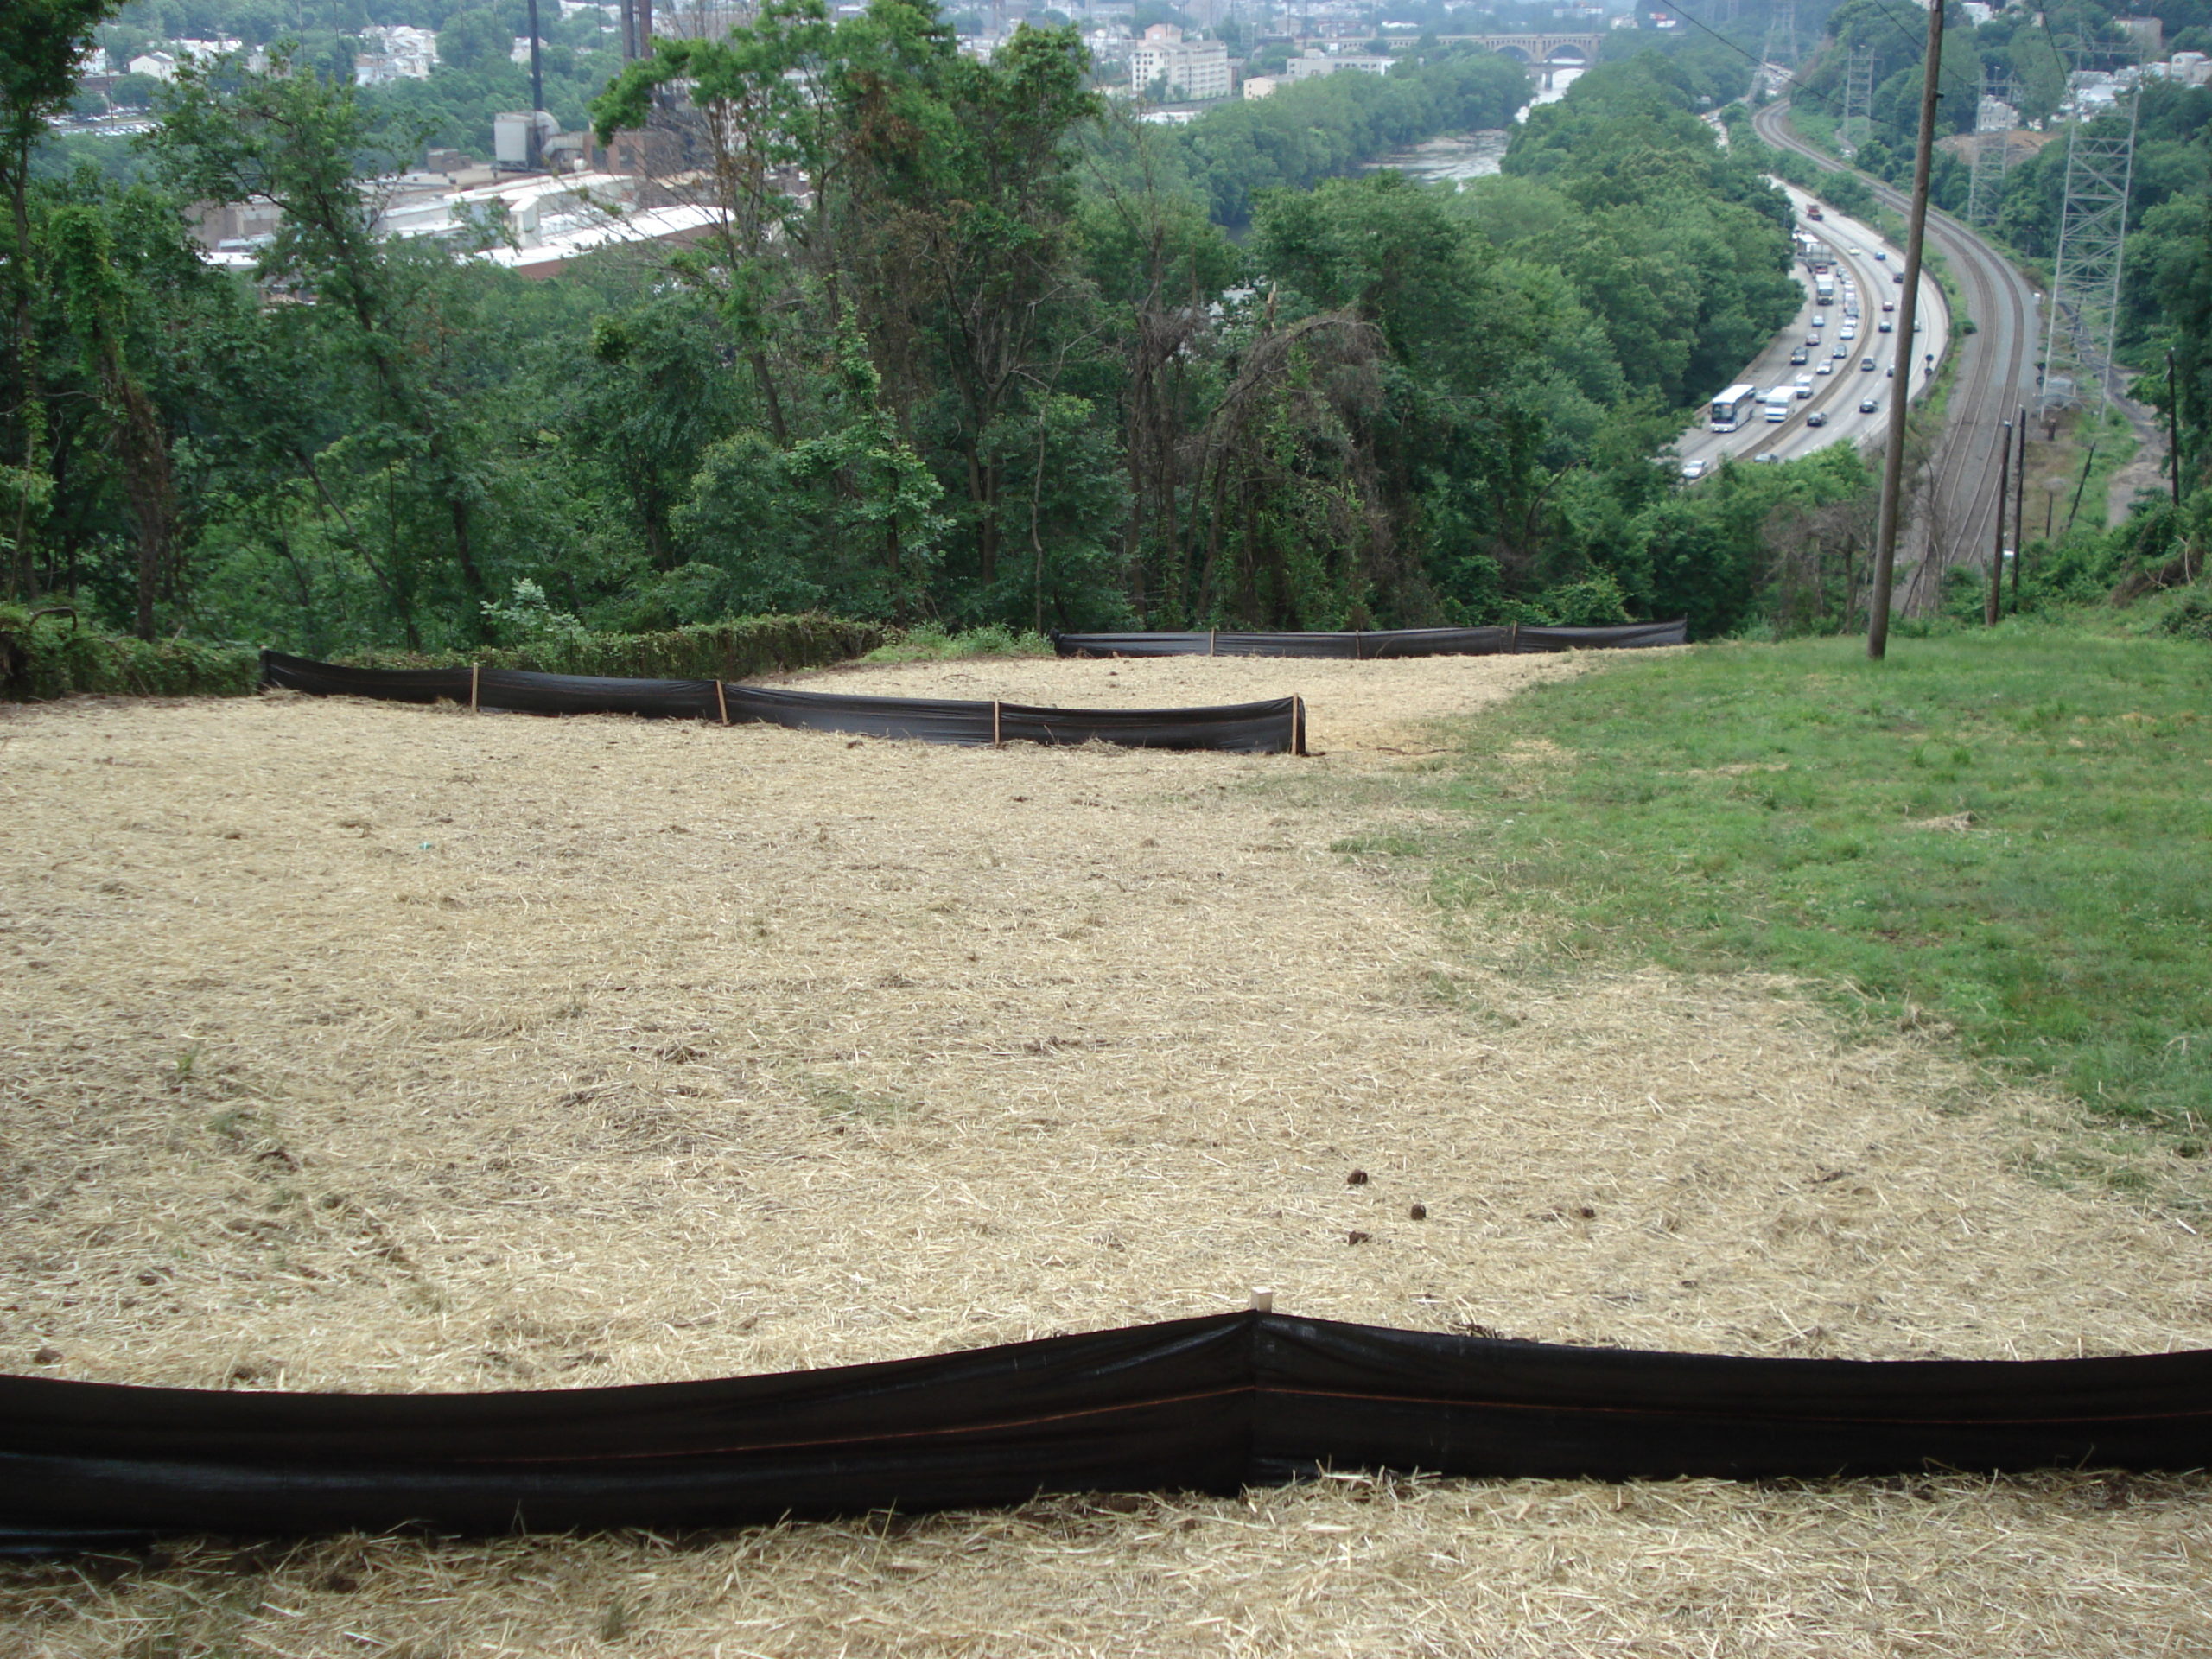 utility silt fence and restoration over schuykill parkway